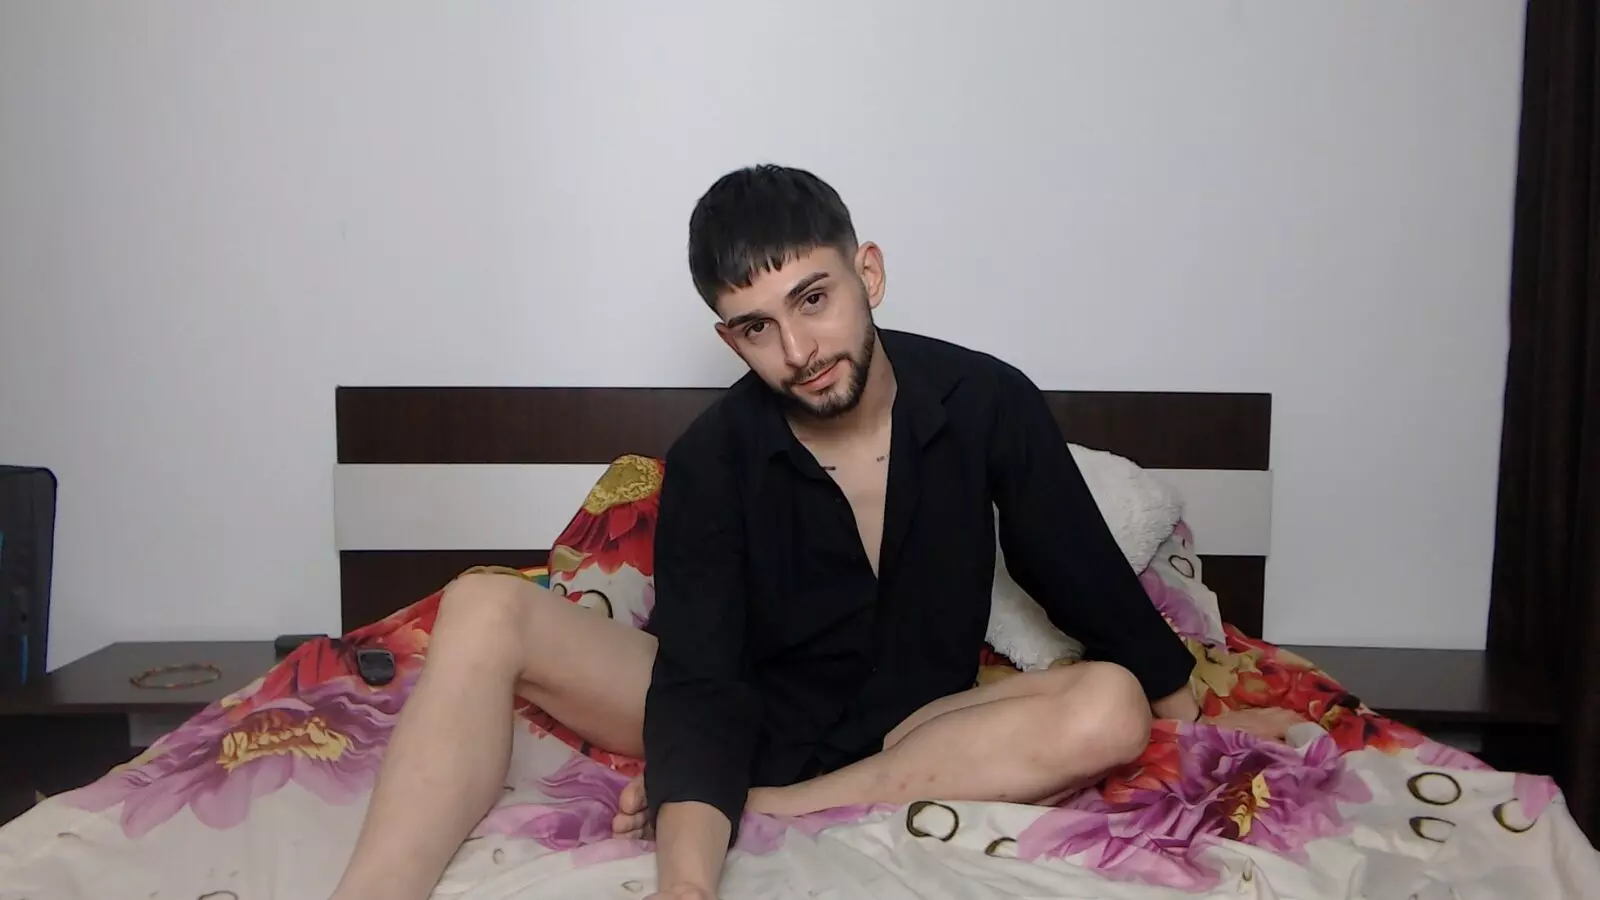  RELATED VIDEOS - WEBCAM AndyJhonathan STRIPS AND MASTURBATES